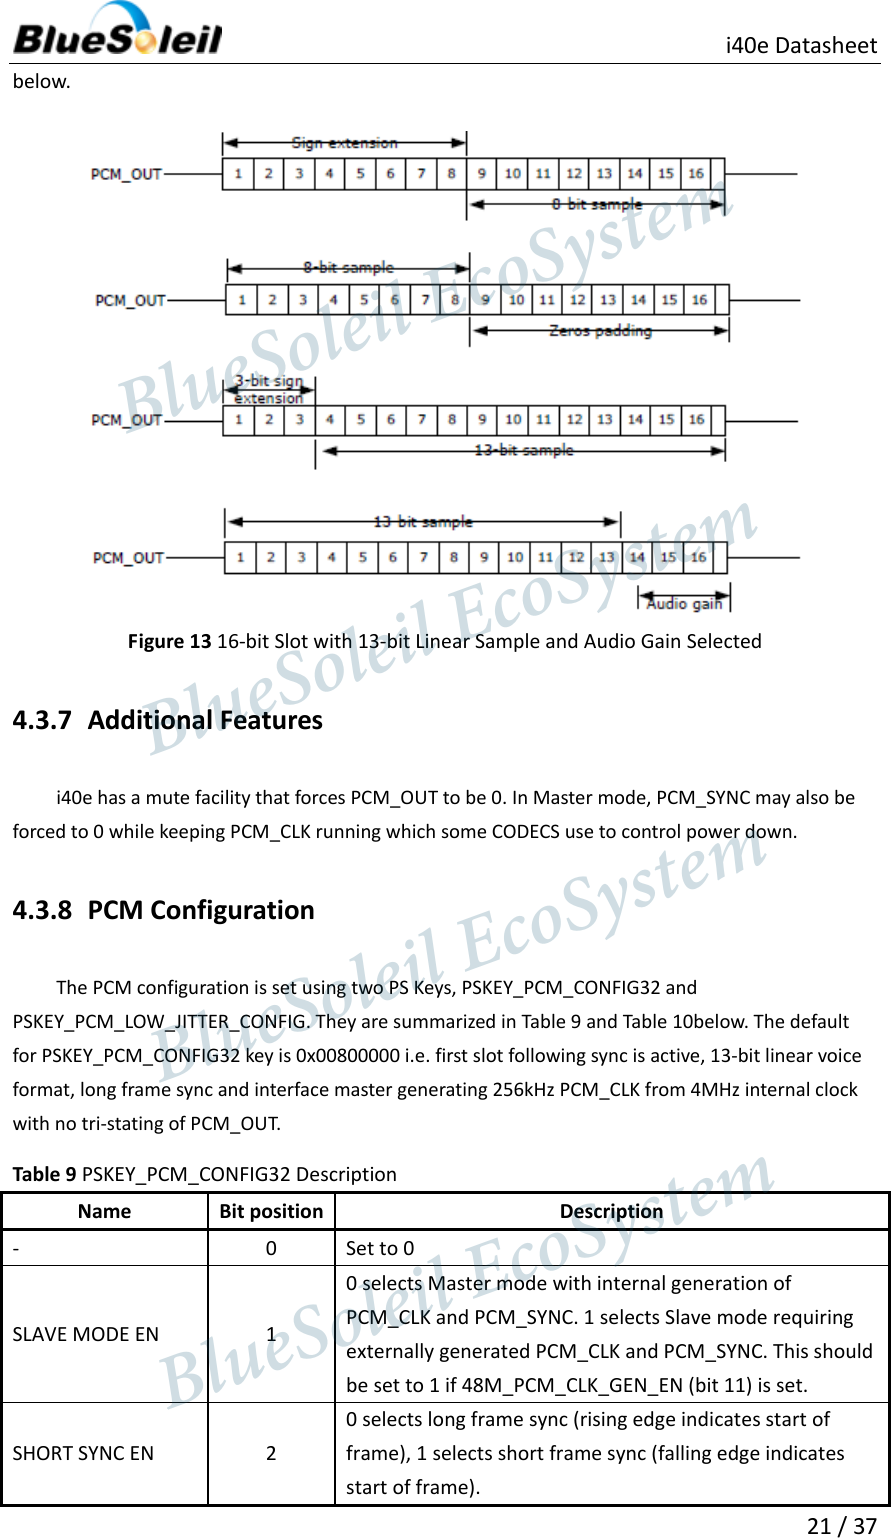                          i40e Datasheet  21 / 37  below.     Figure 13 16-bit Slot with 13-bit Linear Sample and Audio Gain Selected 4.3.7 Additional Features i40e has a mute facility that forces PCM_OUT to be 0. In Master mode, PCM_SYNC may also be forced to 0 while keeping PCM_CLK running which some CODECS use to control power down. 4.3.8 PCM Configuration The PCM configuration is set using two PS Keys, PSKEY_PCM_CONFIG32 and PSKEY_PCM_LOW_JITTER_CONFIG. They are summarized in Table 9 and Table 10below. The default for PSKEY_PCM_CONFIG32 key is 0x00800000 i.e. first slot following sync is active, 13-bit linear voice format, long frame sync and interface master generating 256kHz PCM_CLK from 4MHz internal clock with no tri-stating of PCM_OUT.   Table 9 PSKEY_PCM_CONFIG32 Description Name Bit position Description - 0   Set to 0   SLAVE MODE EN   1   0 selects Master mode with internal generation of PCM_CLK and PCM_SYNC. 1 selects Slave mode requiring externally generated PCM_CLK and PCM_SYNC. This should be set to 1 if 48M_PCM_CLK_GEN_EN (bit 11) is set.   SHORT SYNC EN   2   0 selects long frame sync (rising edge indicates start of frame), 1 selects short frame sync (falling edge indicates start of frame).                    BlueSoleil EcoSystem            BlueSoleil EcoSystem      BlueSoleil EcoSystemBlueSoleil EcoSystem